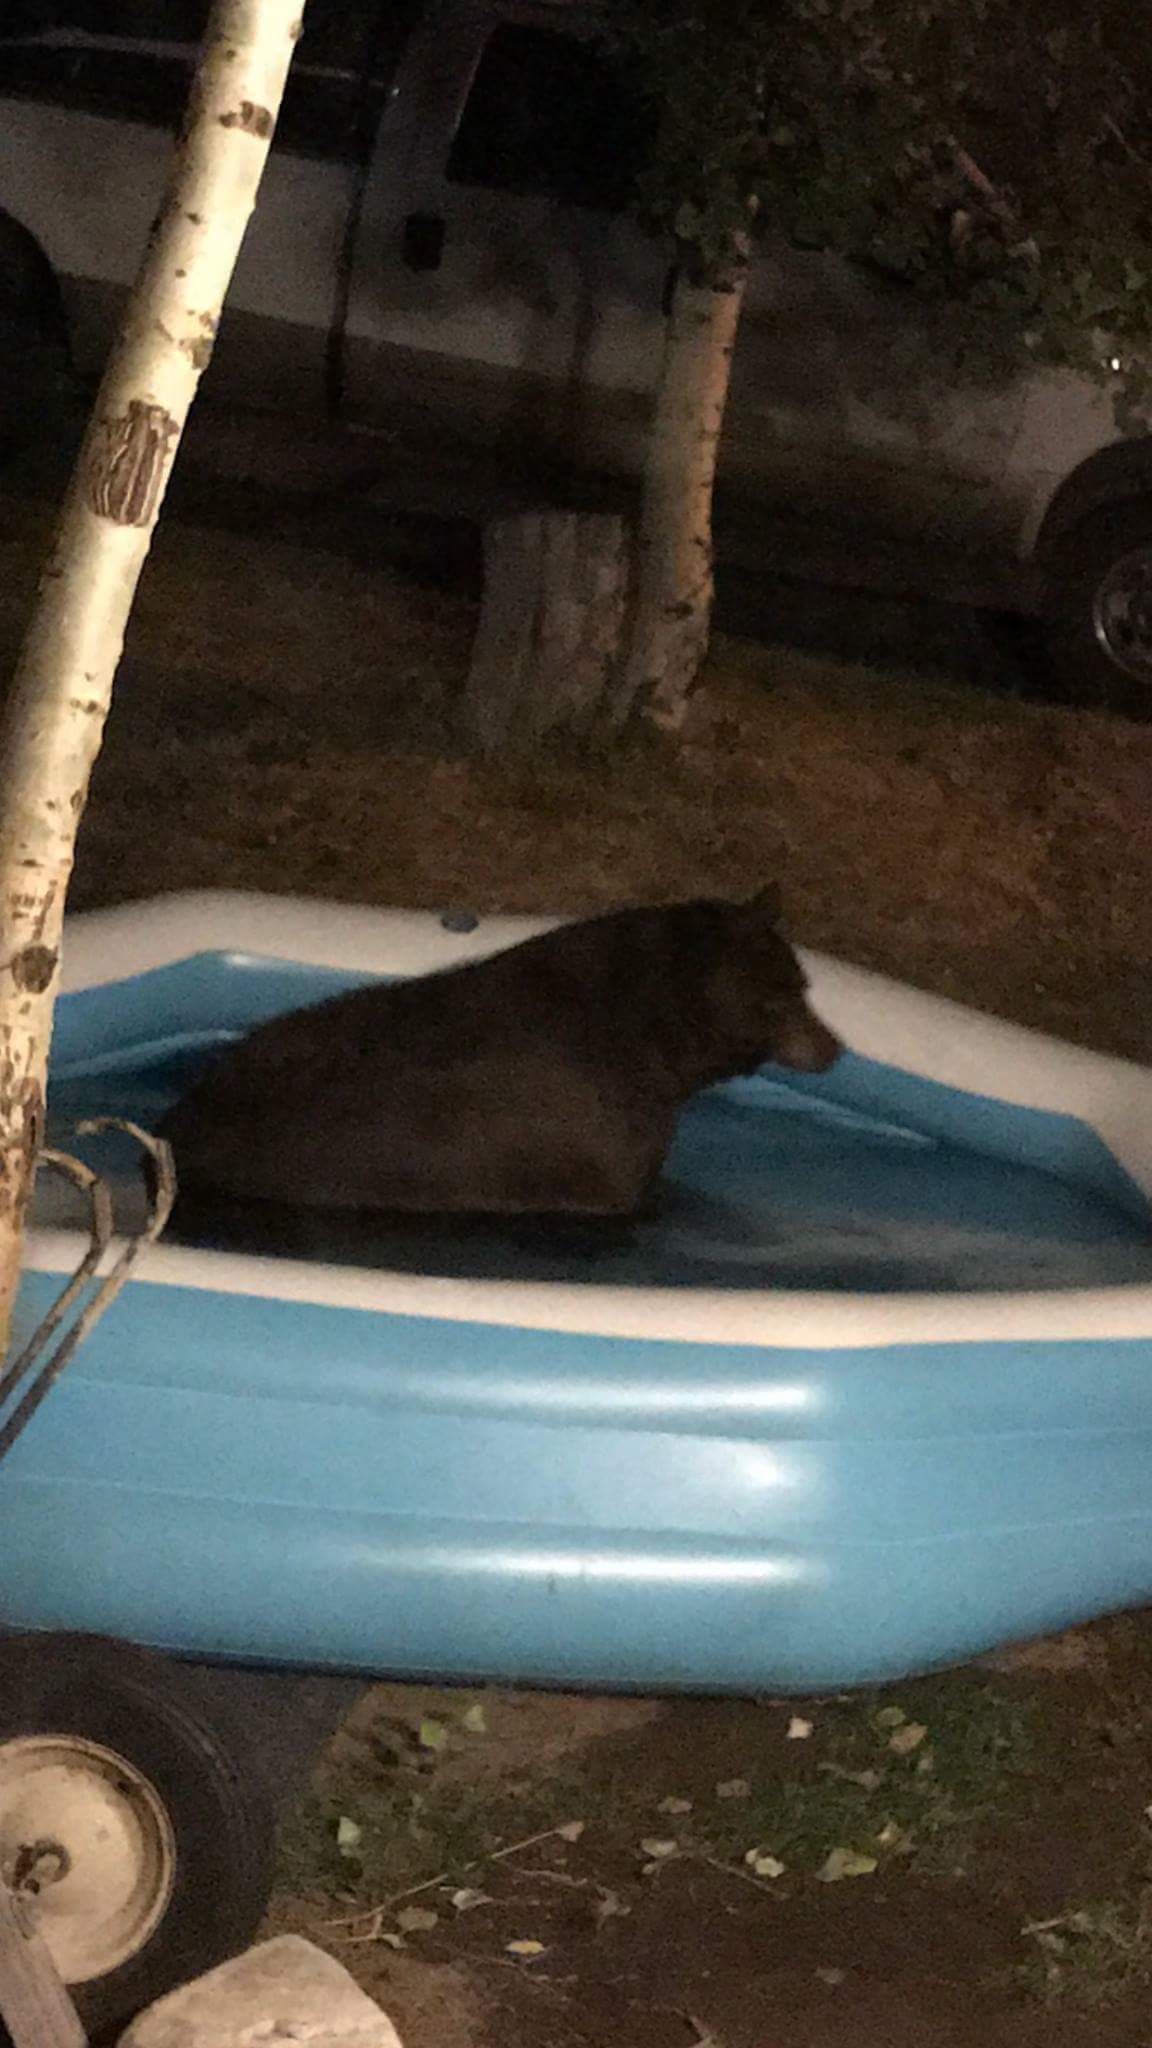 Posted on a local swap "bearly used kiddie pool"